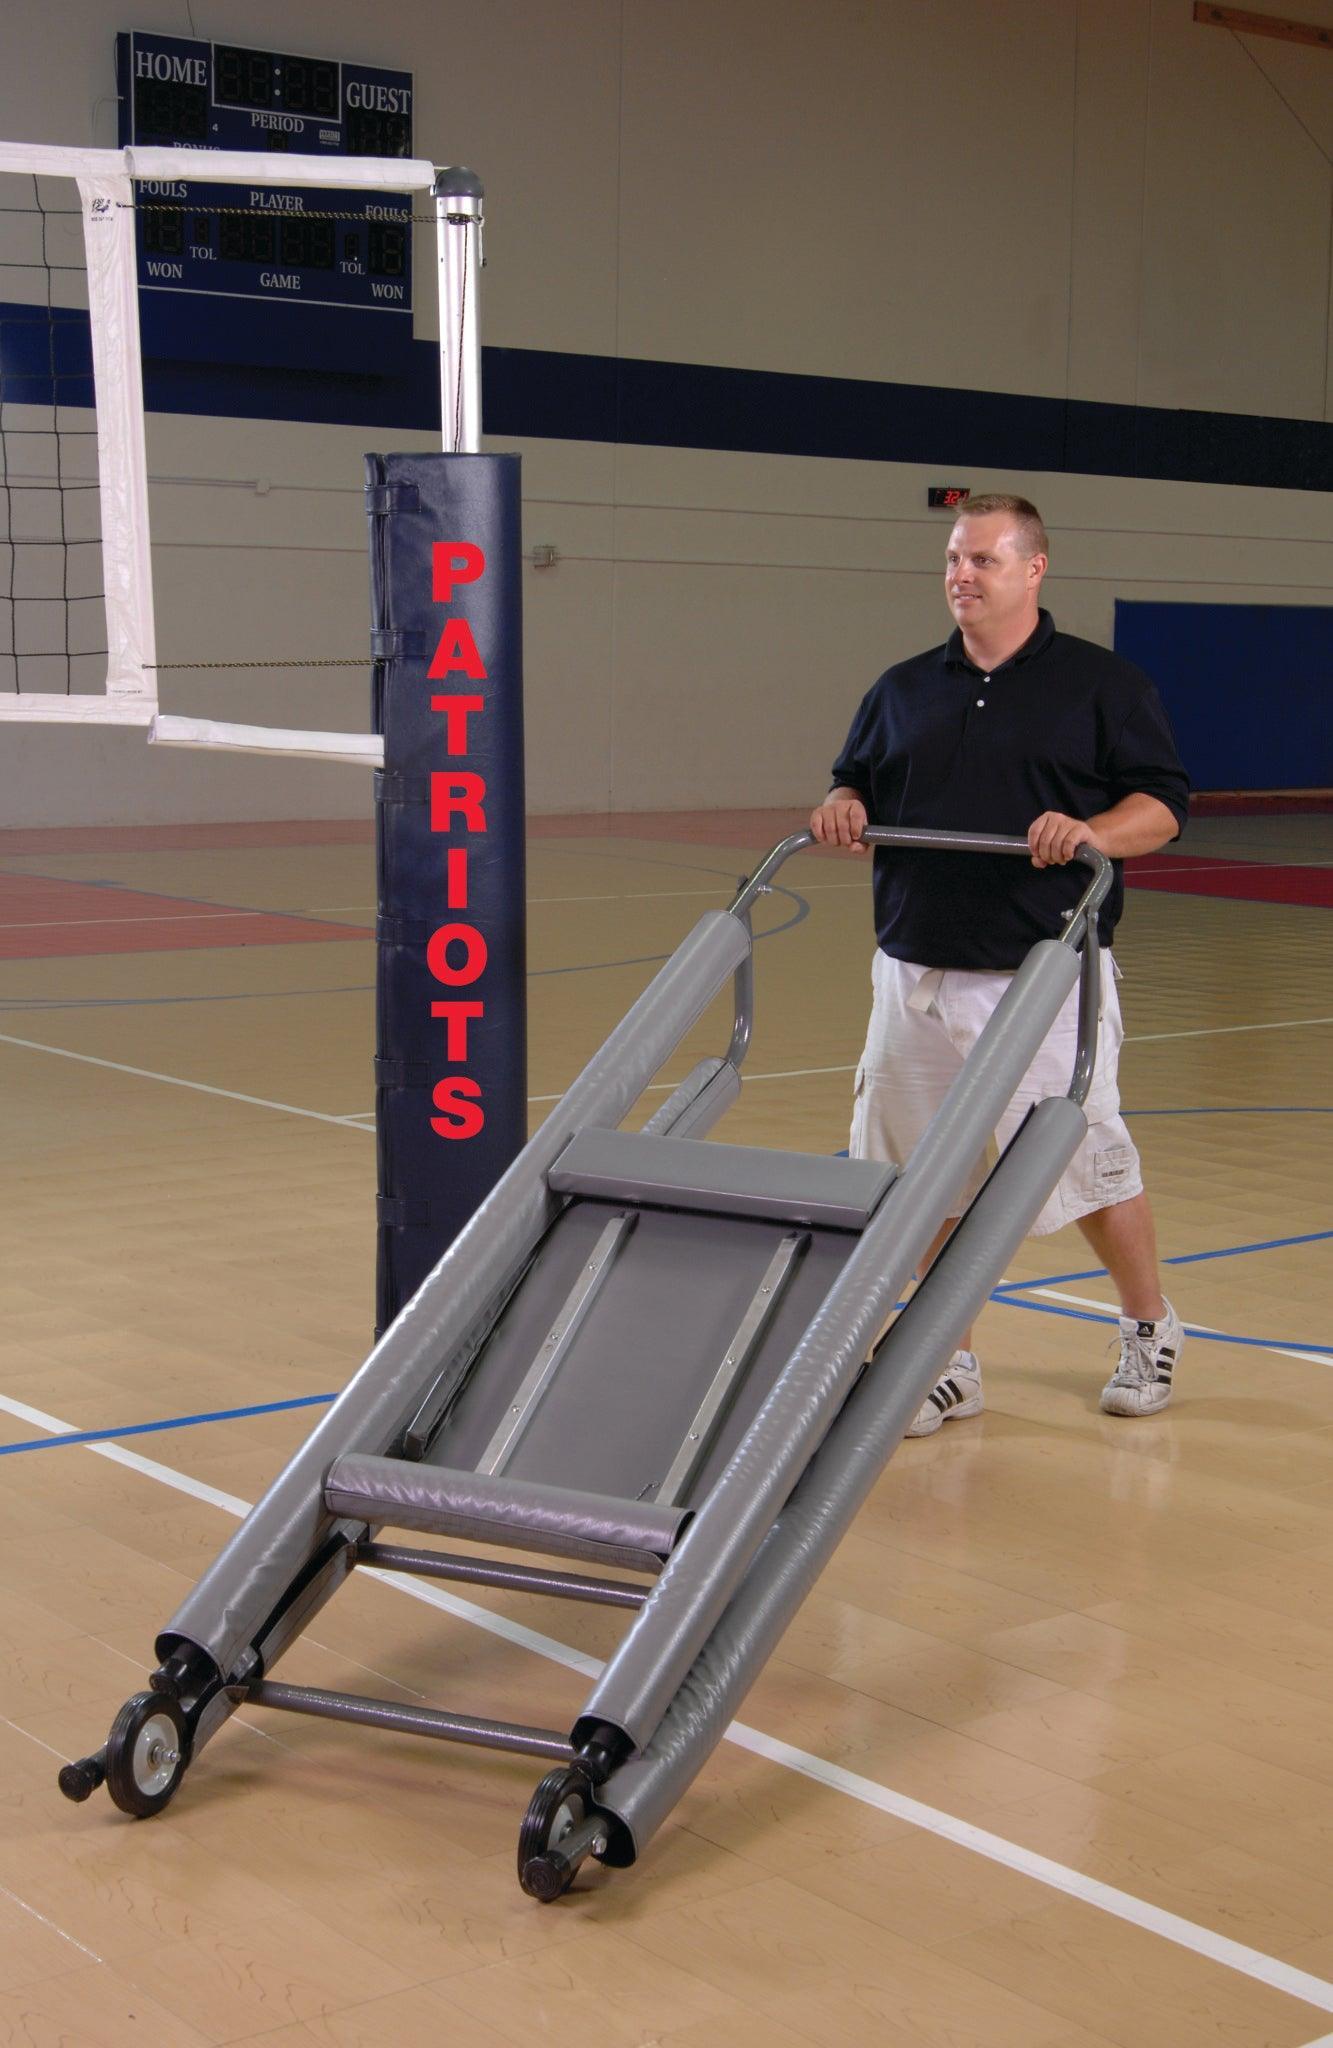 Folding Padded Volleyball Officials Platform with Padding - bisoninc